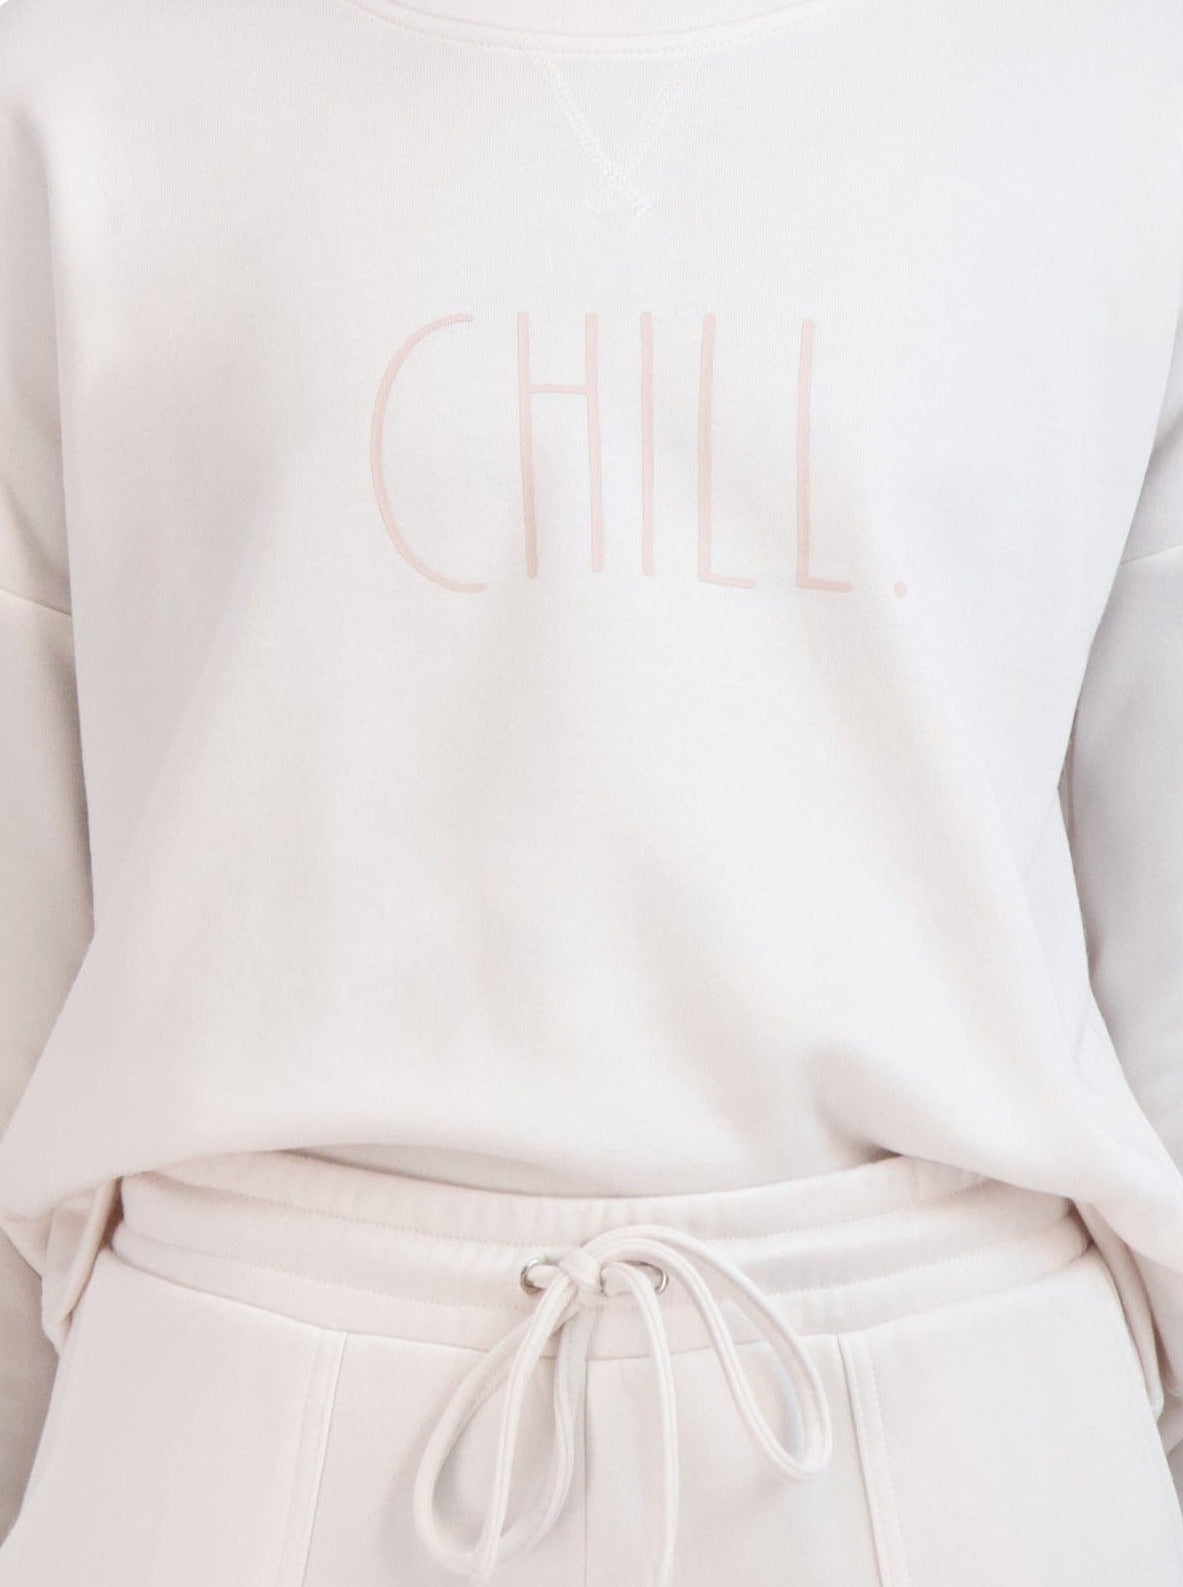 Women's Chill Collection